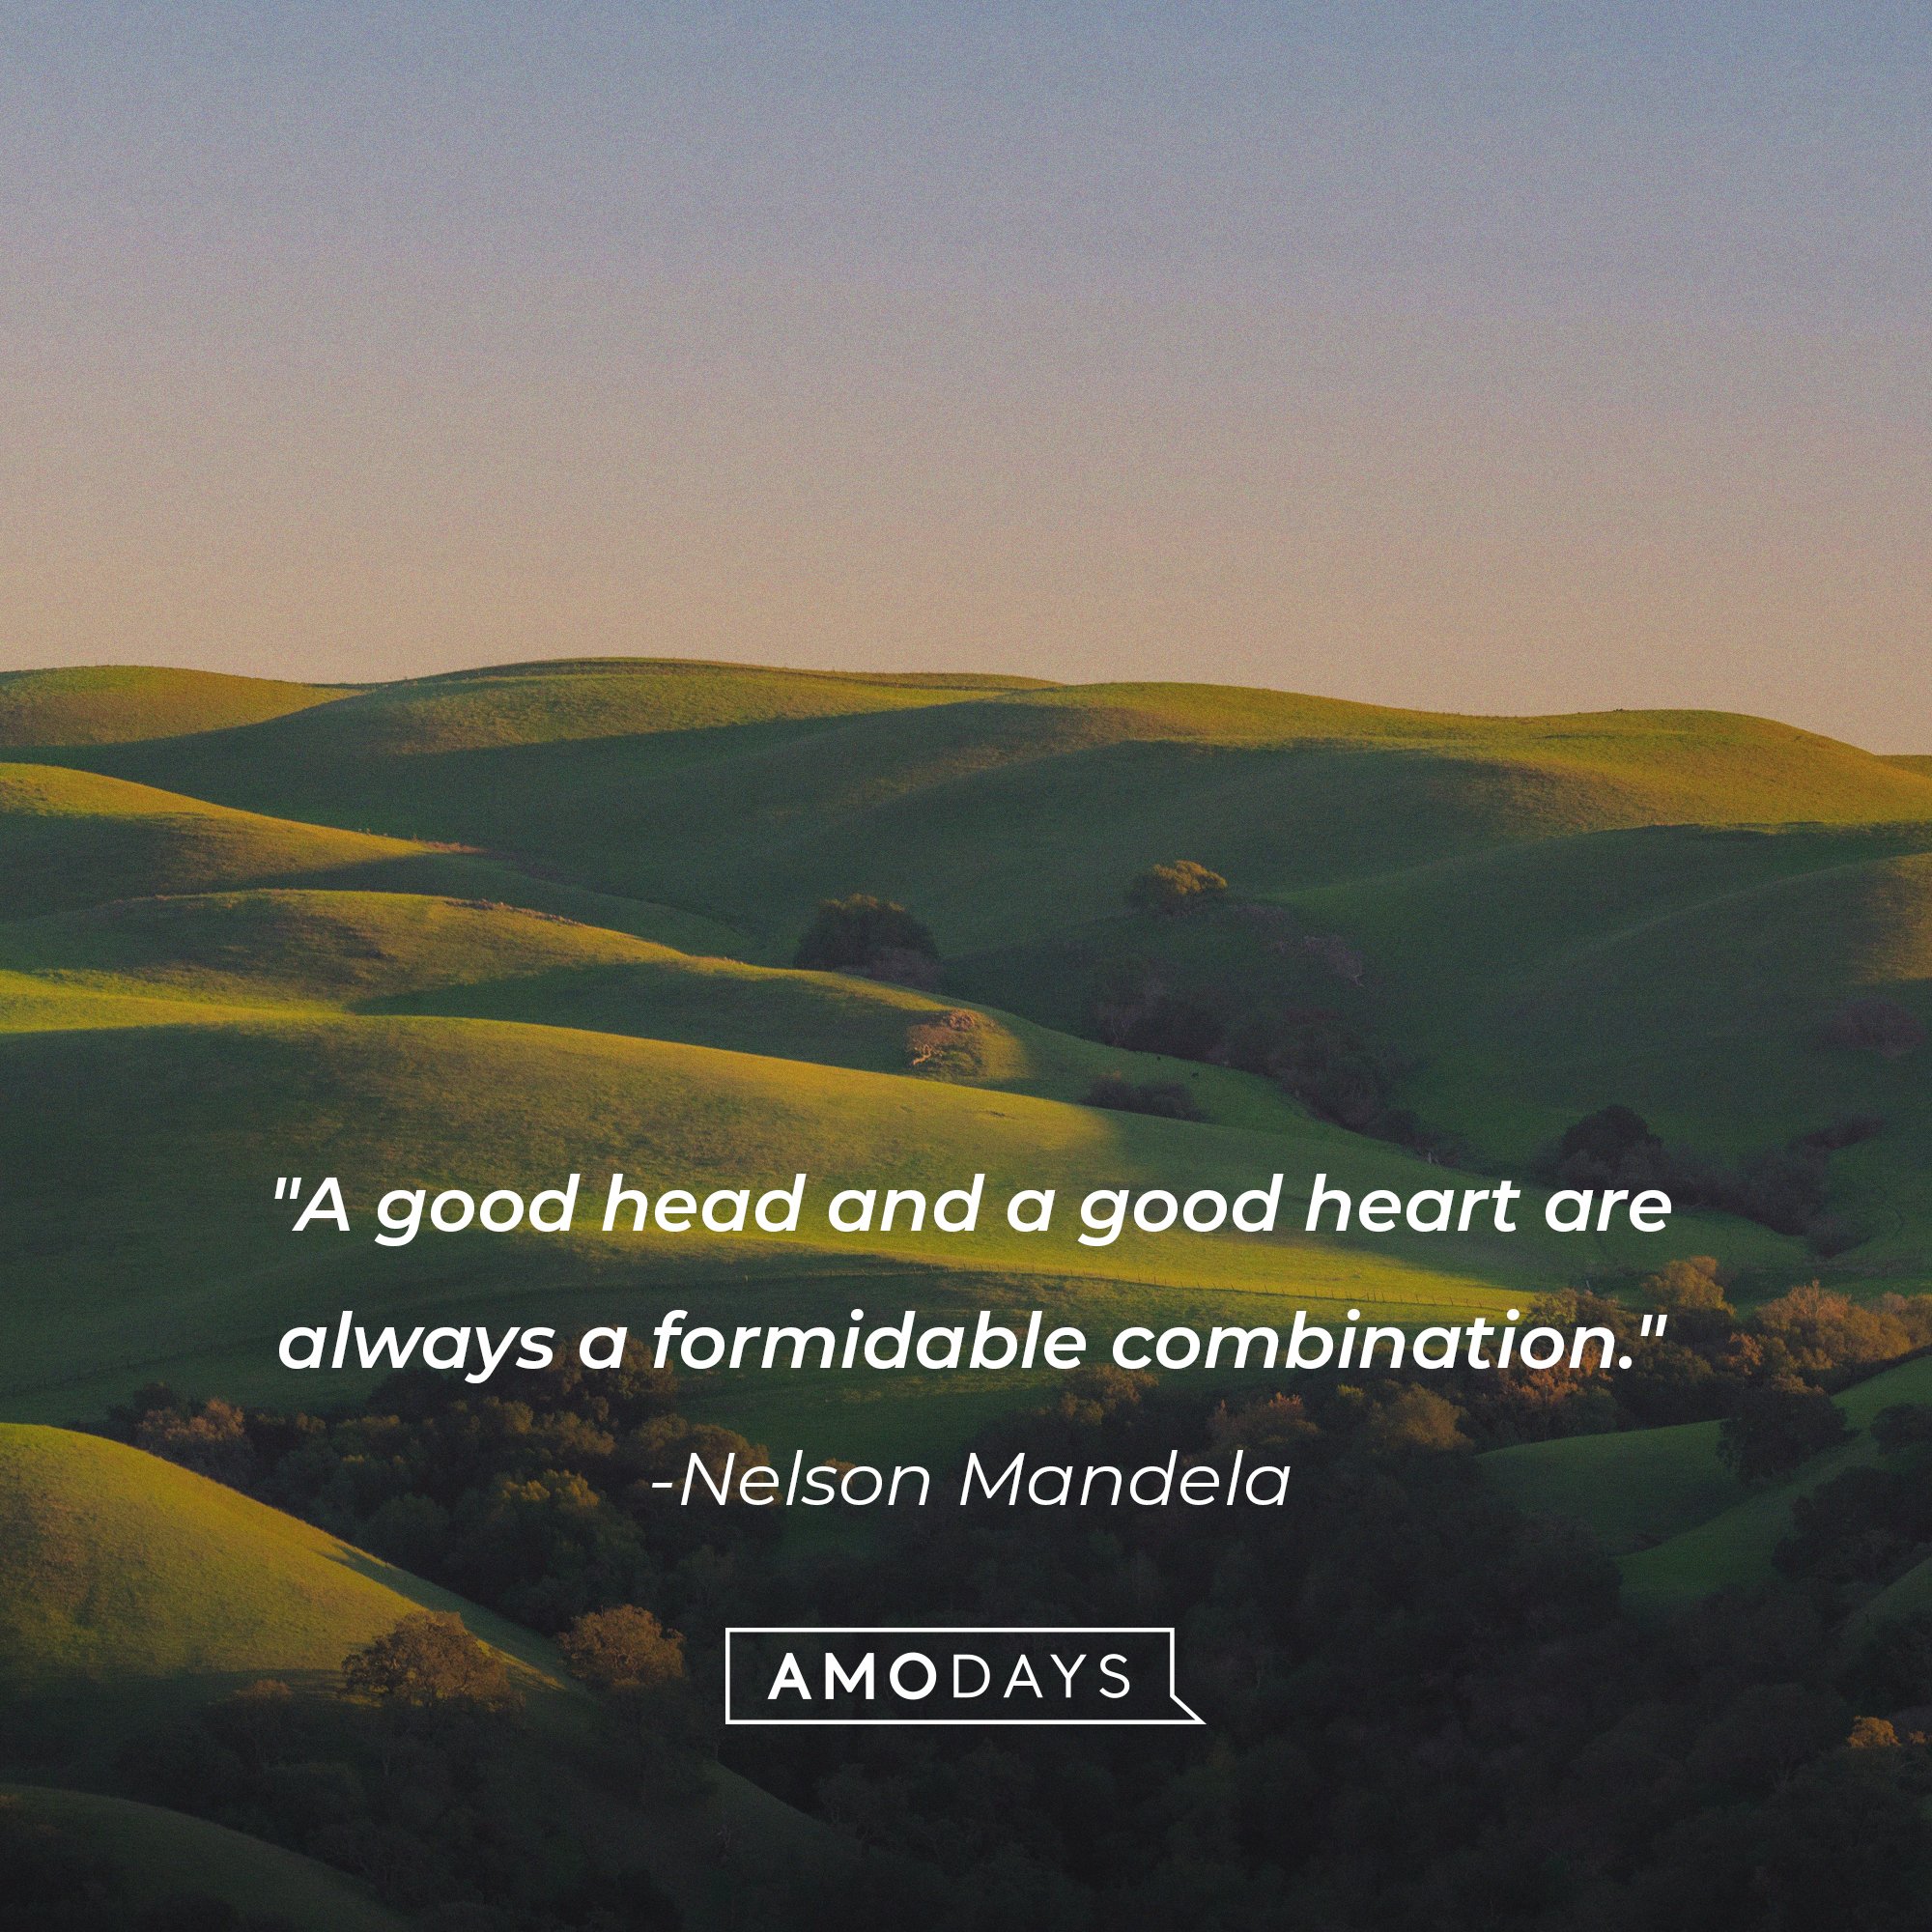 Nelson Mandela’s quote: "A good head and a good heart are always a formidable combination." | Image: AmoDays 